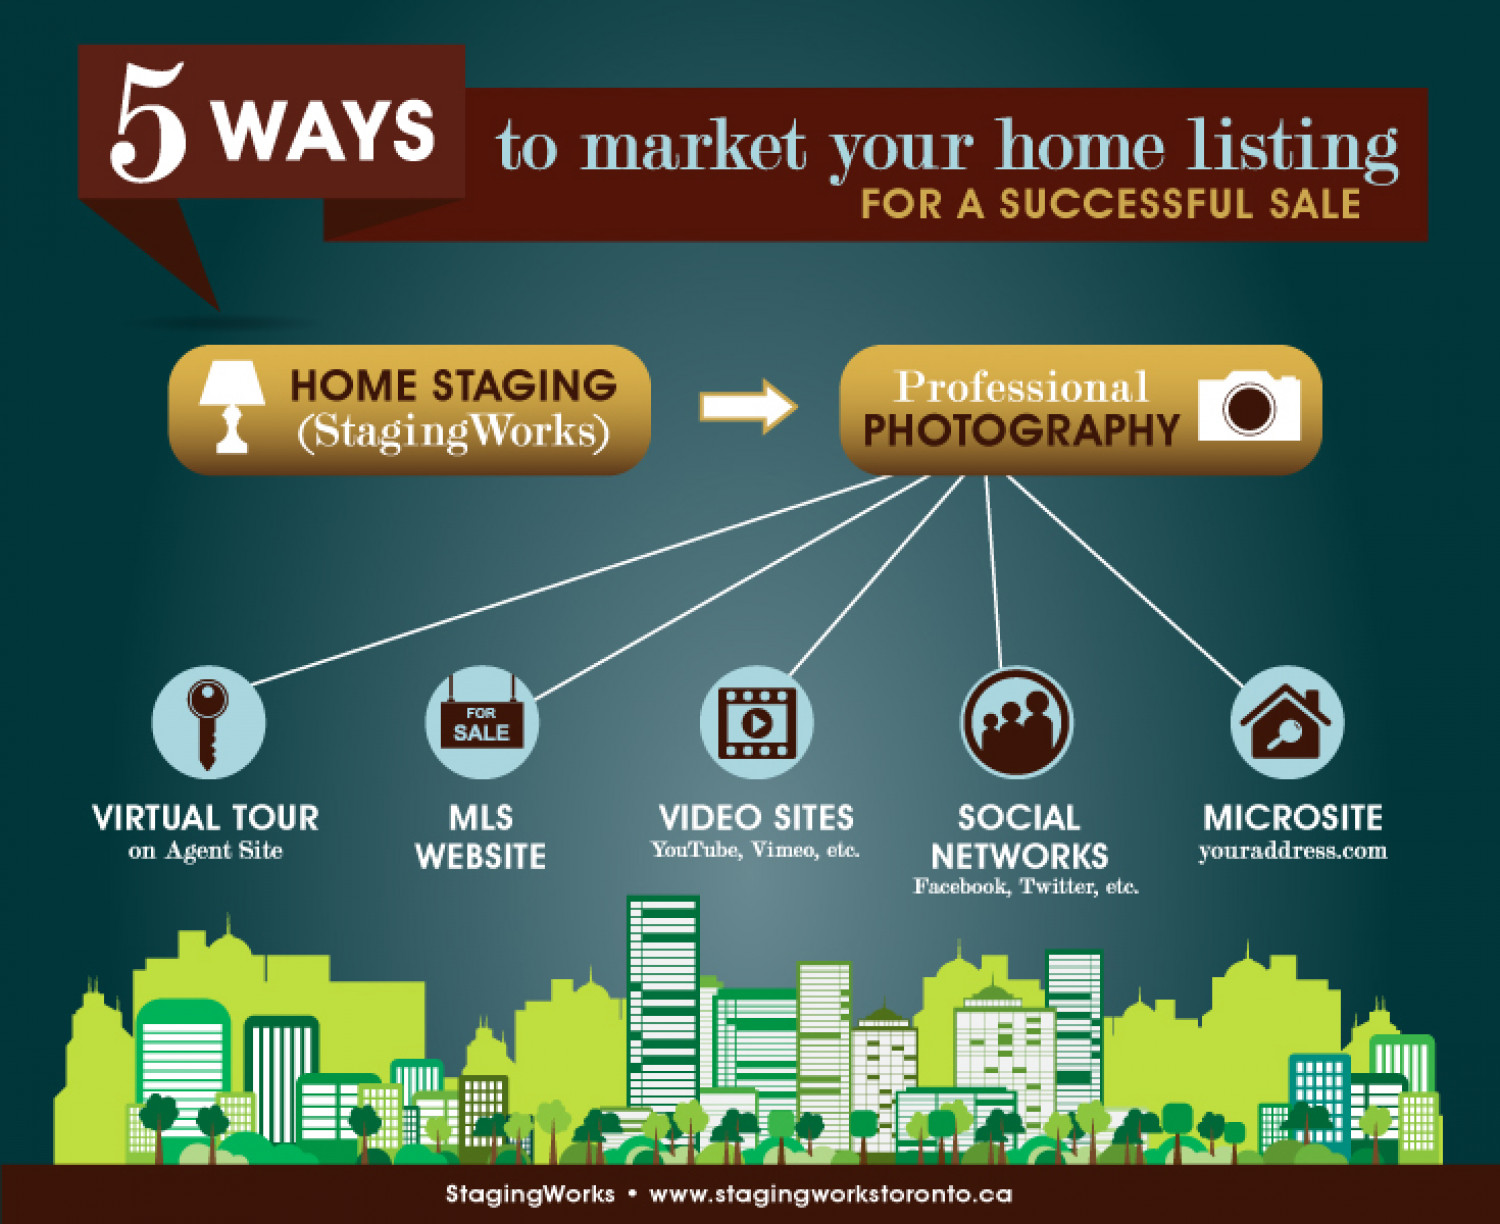 INFOGRAPHIC: FIVE WAYS TO MARKET YOUR TORONTO HOME LISTING Infographic